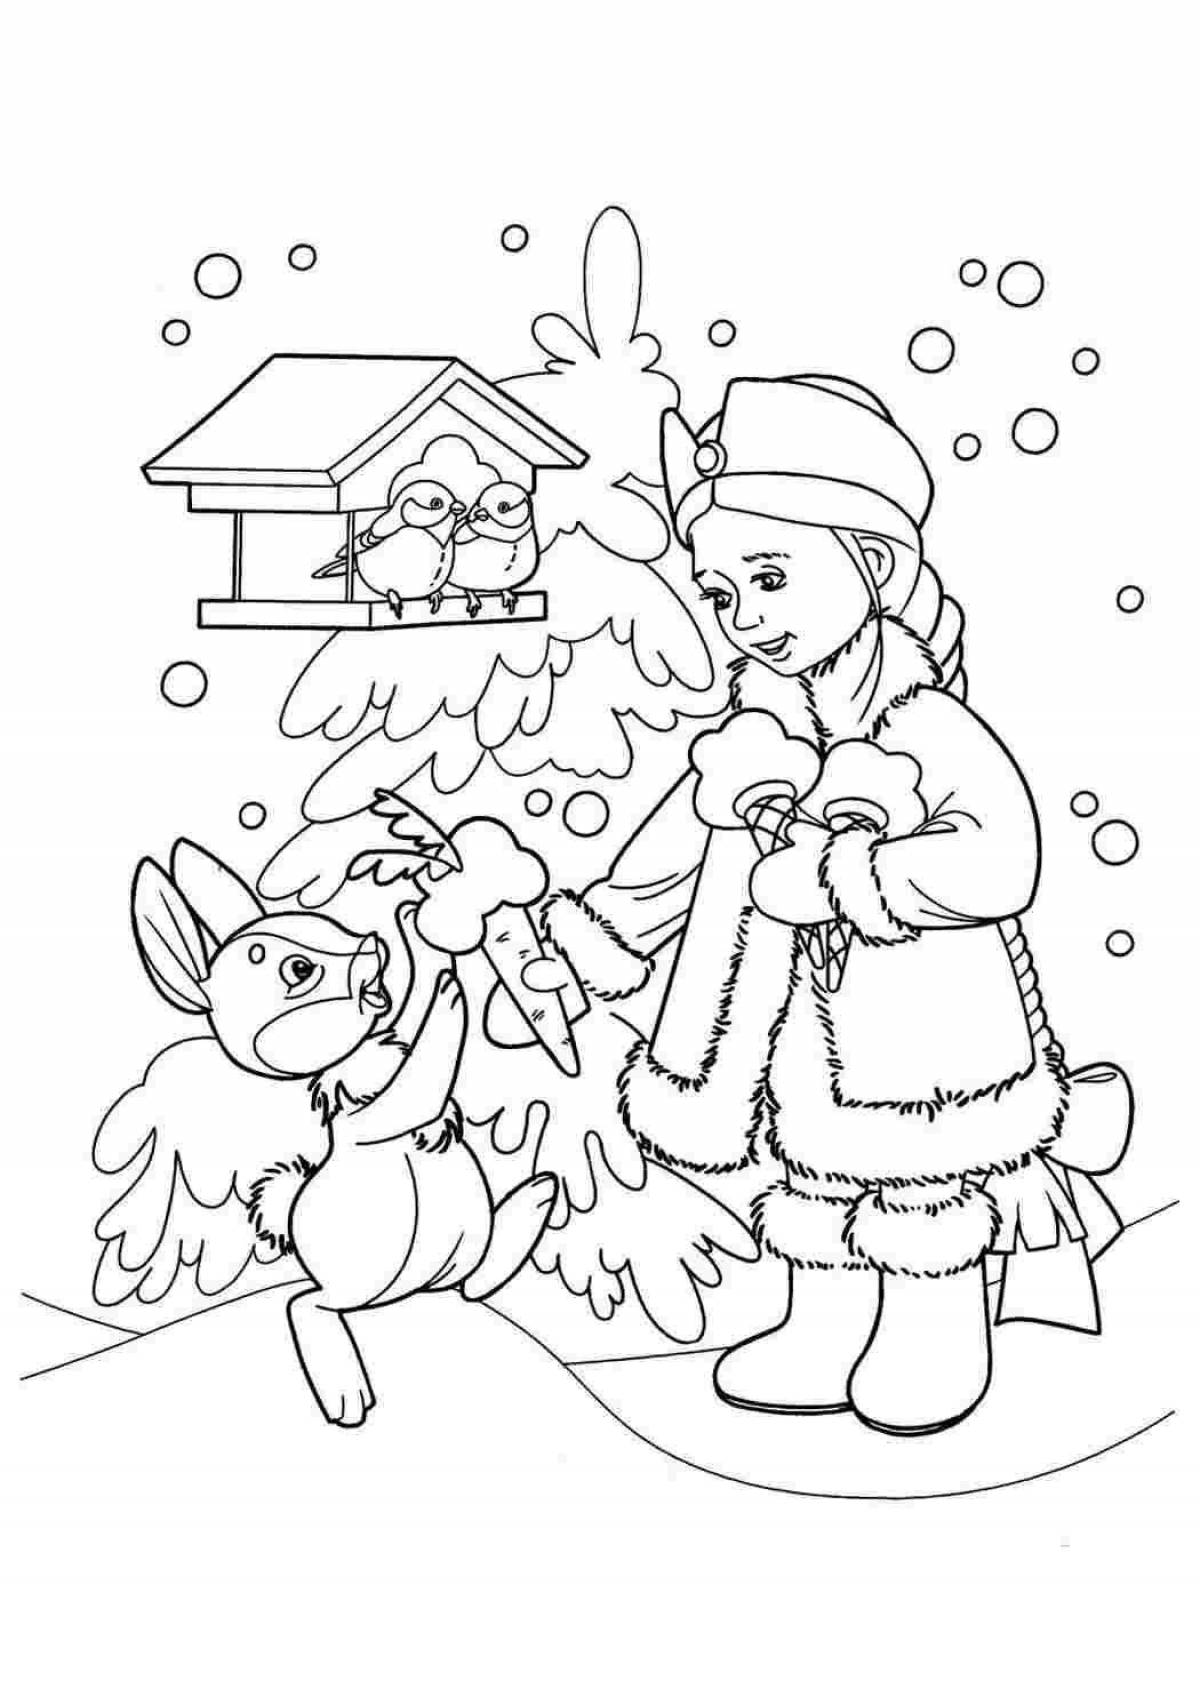 Coloring book charming Christmas tale